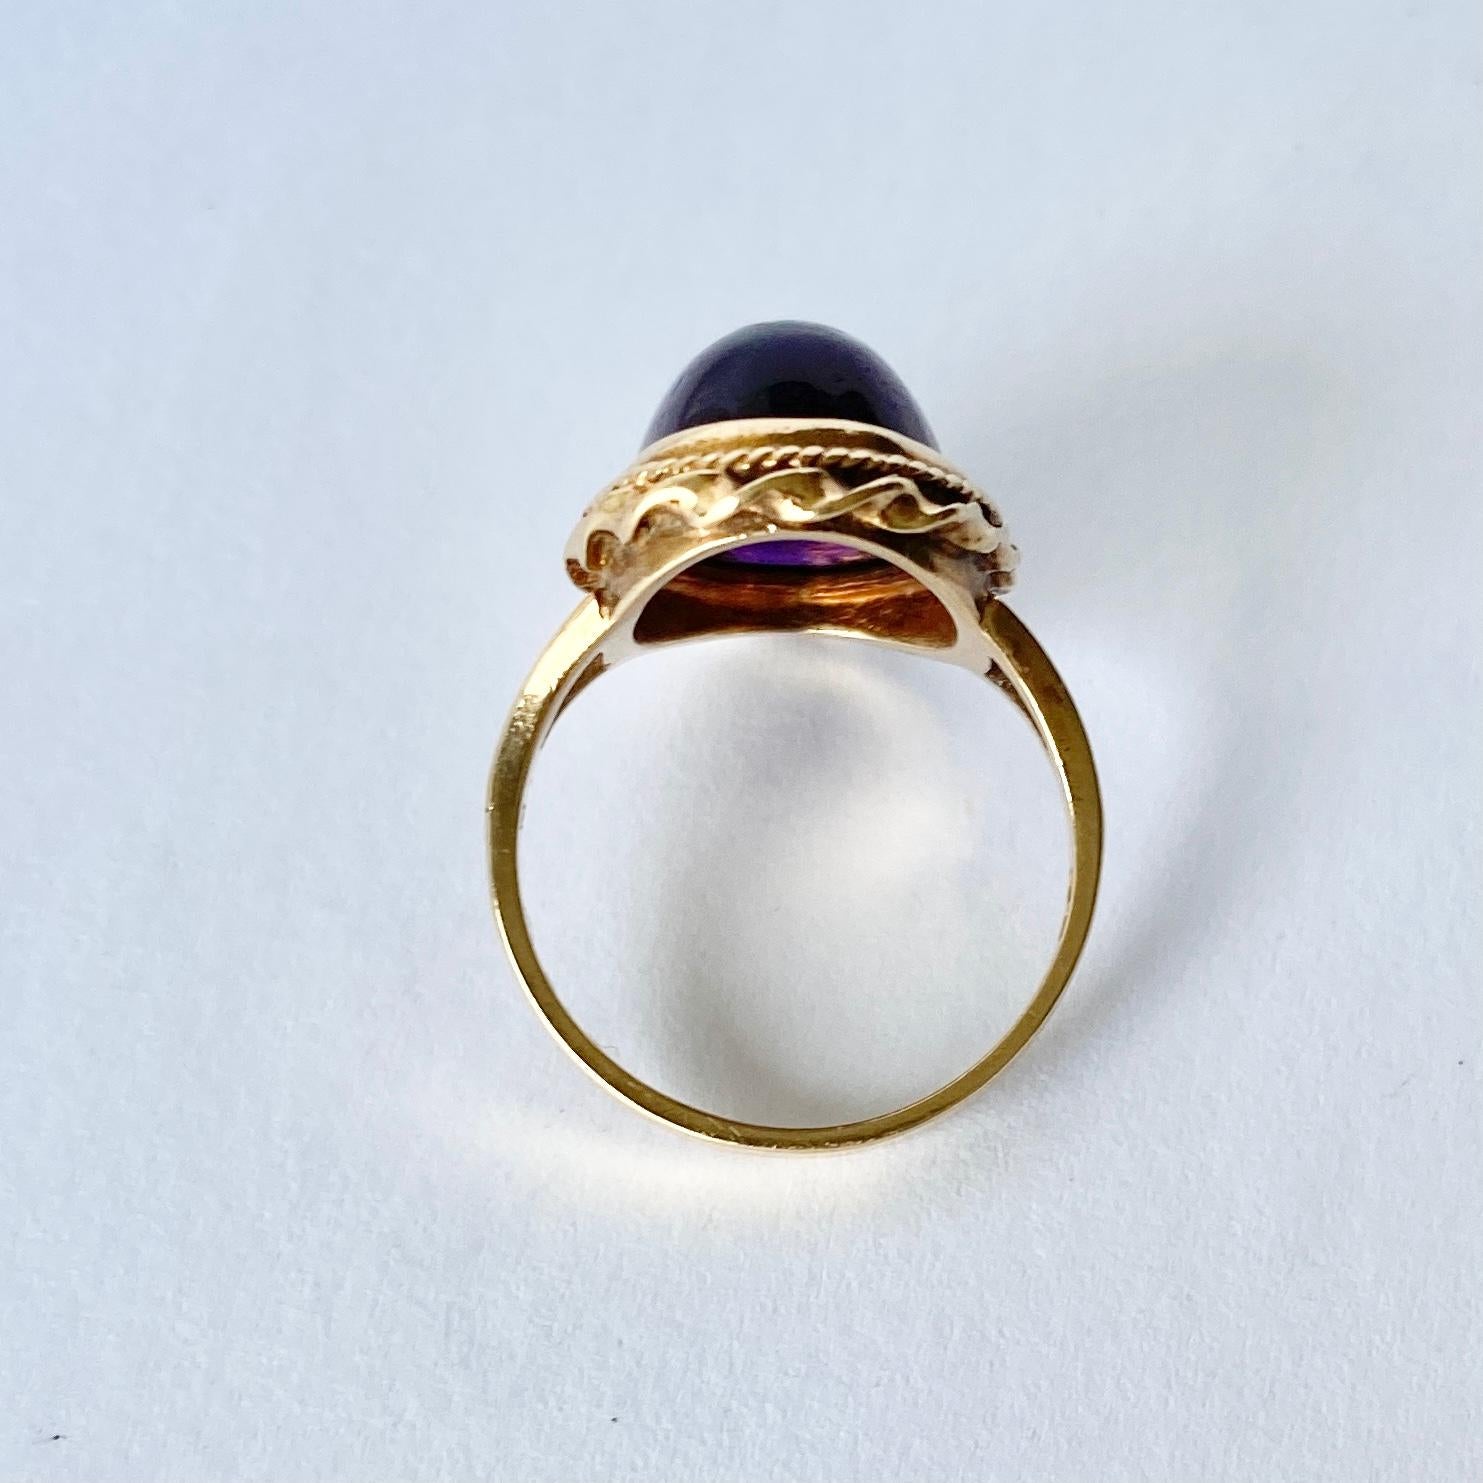 This glossy and bright purple amethyst stone is surrounded by a frame of thick and thin twists of gold. Modelled in 9ct gold and made in Chester, England. 

Ring Size: L 1/2 or 6 
Stone Dimensions: 14x10mm 

Weight: 4g